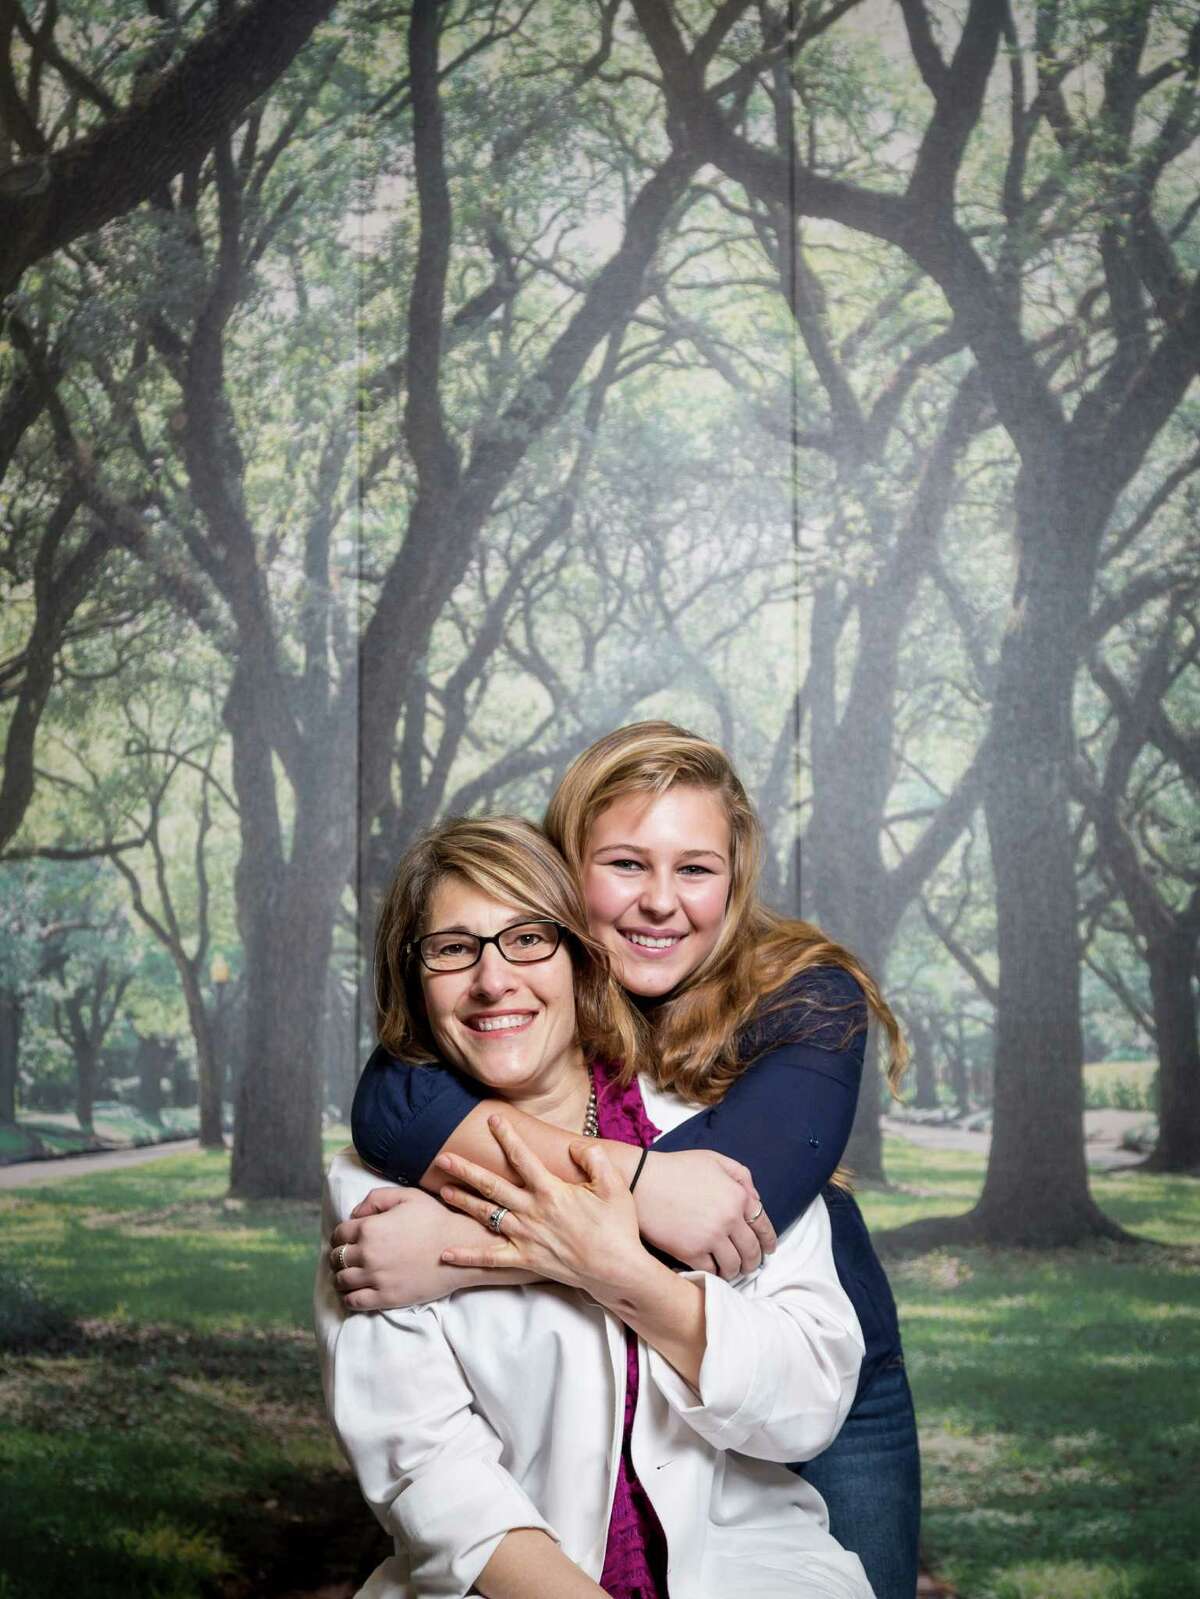 Dr. Lois Ramondetta and her daughter Jessica Bauer pose for a photo at MD Anderson's Ambulatory Clinic Building (Mays Clinic), Monday, Feb. 11, 2013, in Houston. ( Michael Paulsen / Houston Chronicle )